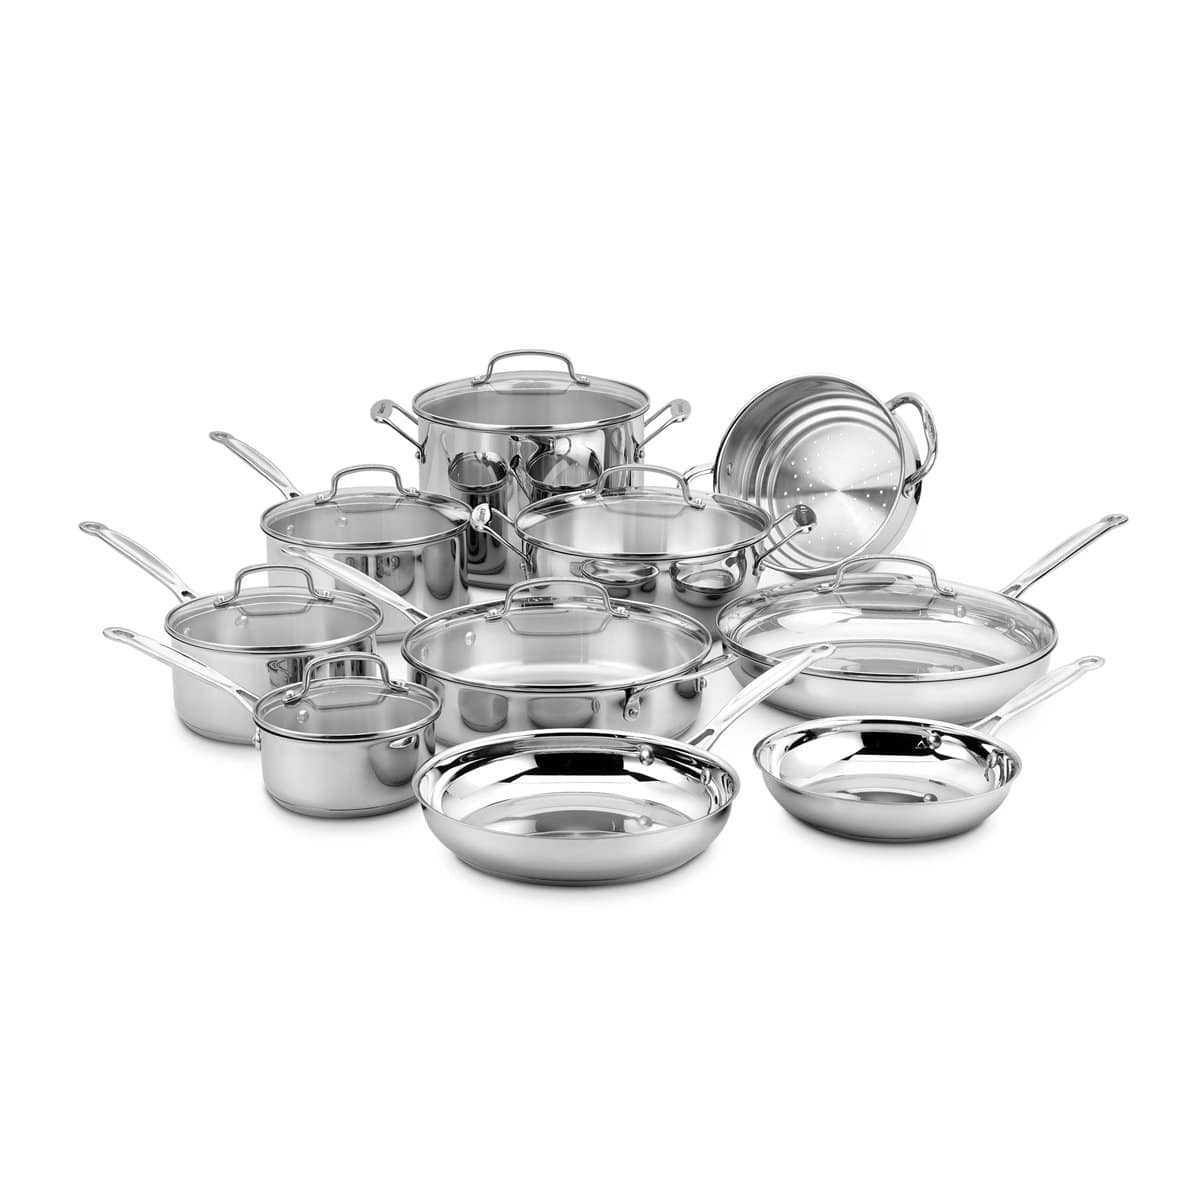 Cuisinart 7193-20P Chef's Classic Stainless 3-Quart Cook & Pour